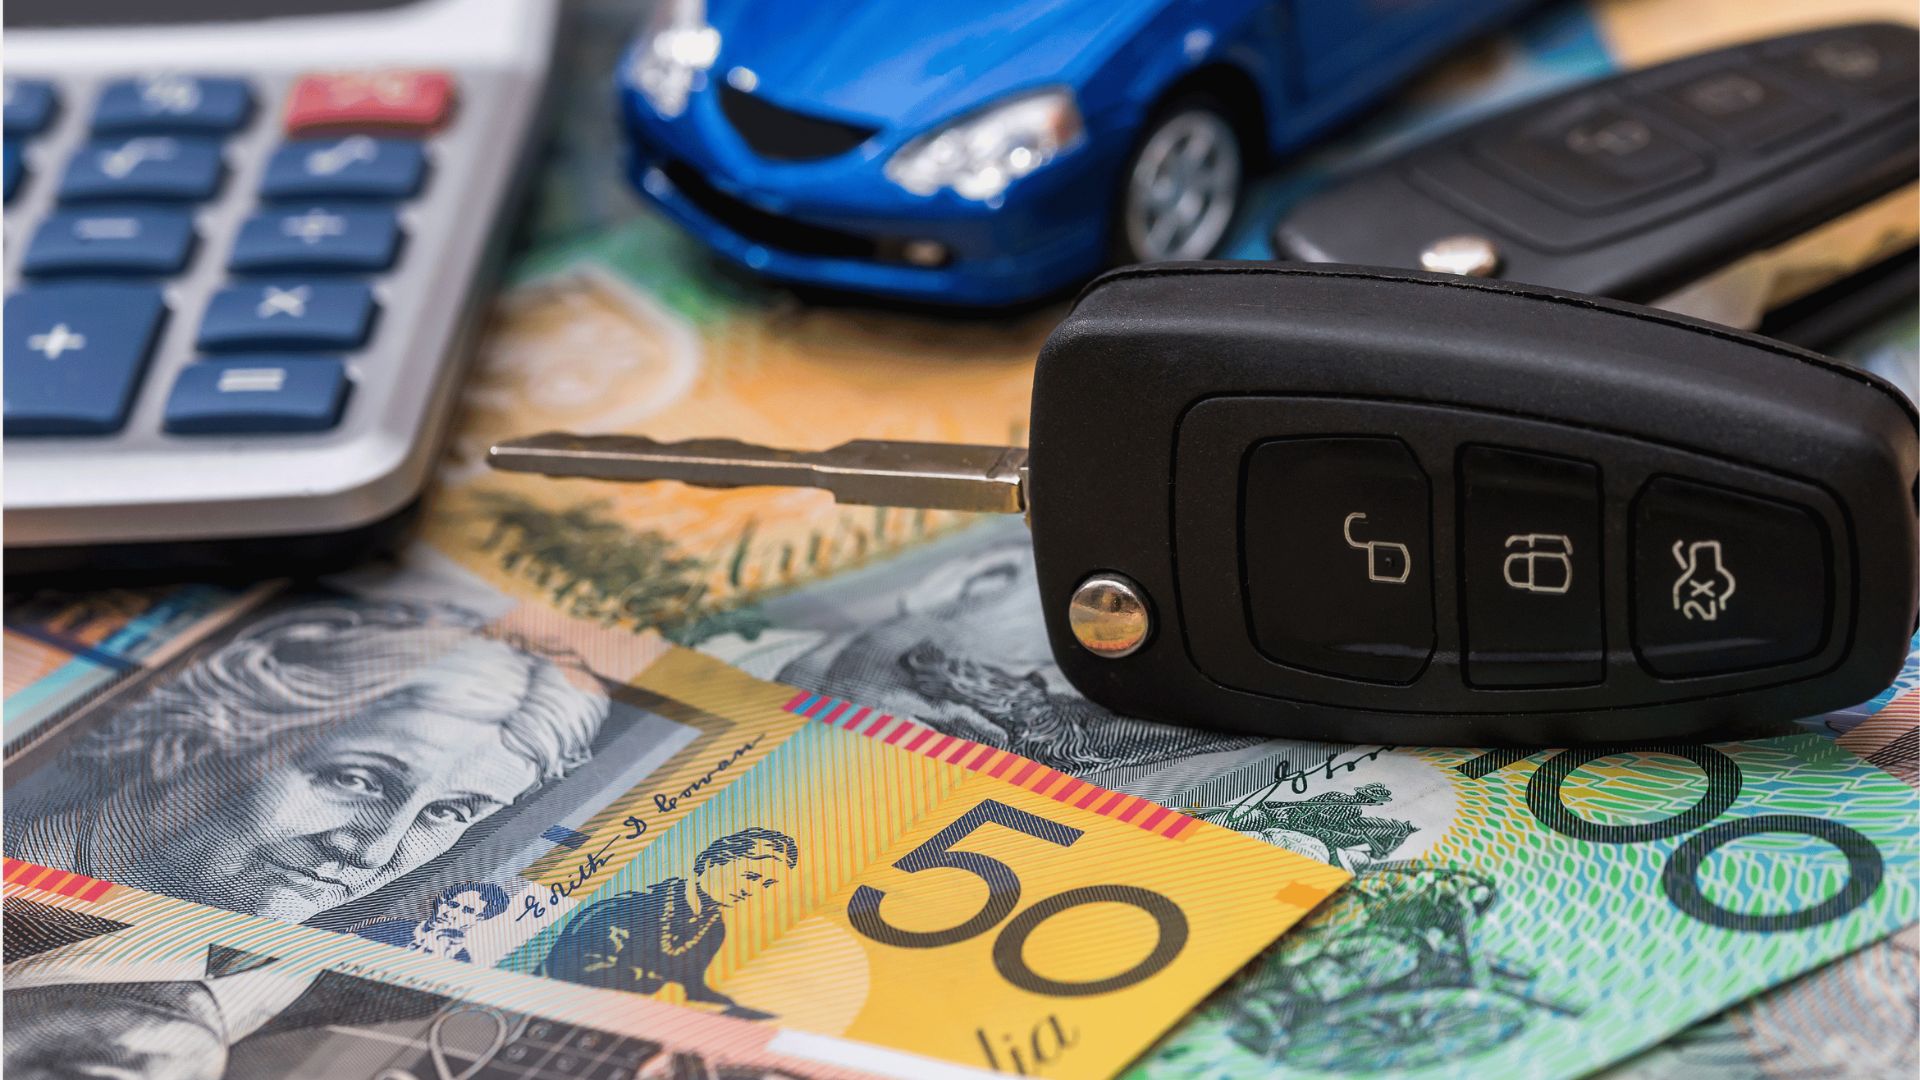 Keys sitting on money | Featured image for the How to Finance a Car with No Deposit – What You Need to Know blog from Fido Finance.